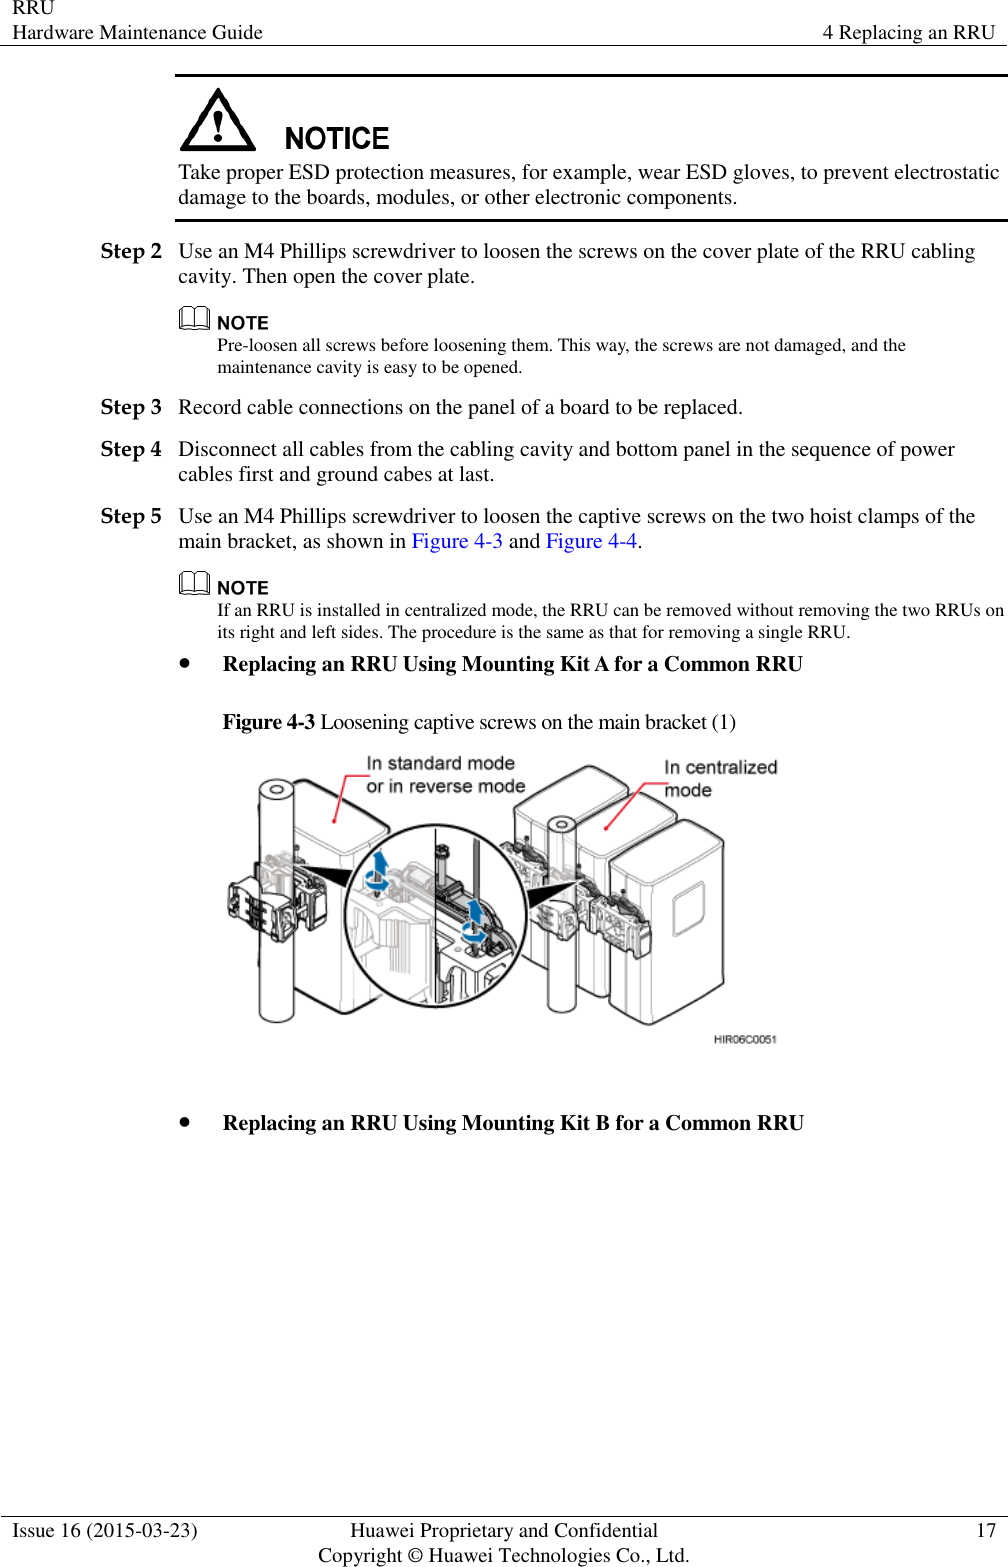 RRU Hardware Maintenance Guide 4 Replacing an RRU  Issue 16 (2015-03-23) Huawei Proprietary and Confidential                                     Copyright © Huawei Technologies Co., Ltd. 17   Take proper ESD protection measures, for example, wear ESD gloves, to prevent electrostatic damage to the boards, modules, or other electronic components. Step 2 Use an M4 Phillips screwdriver to loosen the screws on the cover plate of the RRU cabling cavity. Then open the cover plate.  Pre-loosen all screws before loosening them. This way, the screws are not damaged, and the maintenance cavity is easy to be opened. Step 3 Record cable connections on the panel of a board to be replaced. Step 4 Disconnect all cables from the cabling cavity and bottom panel in the sequence of power cables first and ground cabes at last. Step 5 Use an M4 Phillips screwdriver to loosen the captive screws on the two hoist clamps of the main bracket, as shown in Figure 4-3 and Figure 4-4.  If an RRU is installed in centralized mode, the RRU can be removed without removing the two RRUs on its right and left sides. The procedure is the same as that for removing a single RRU.  Replacing an RRU Using Mounting Kit A for a Common RRU Figure 4-3 Loosening captive screws on the main bracket (1)    Replacing an RRU Using Mounting Kit B for a Common RRU 